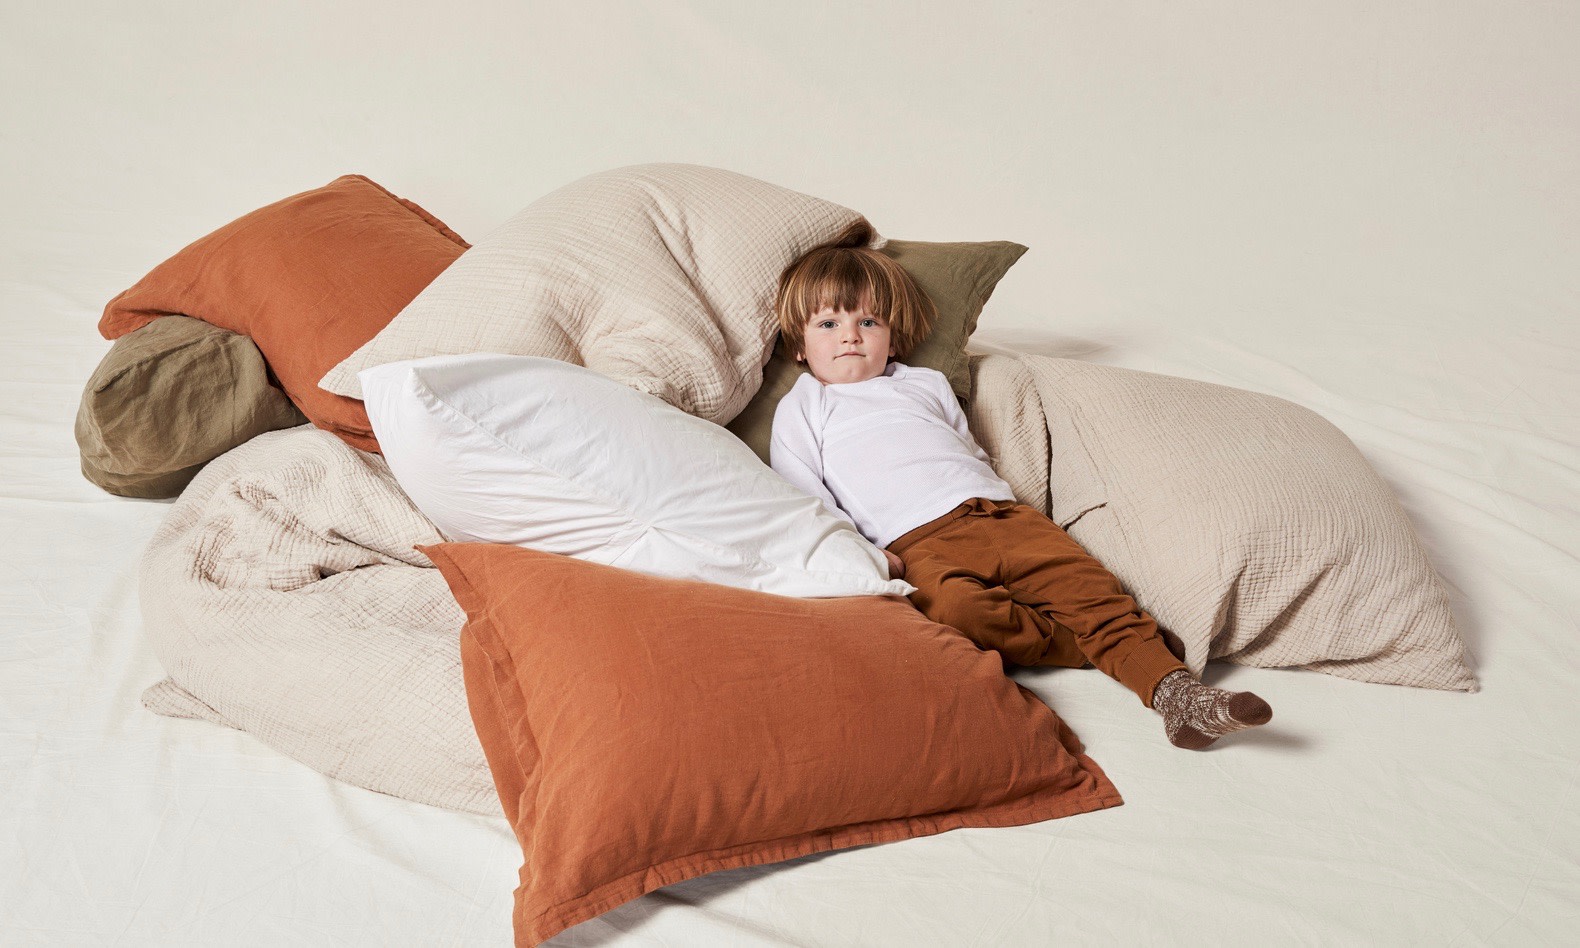 Soft throw and pillow sham set offers an affordable way to make